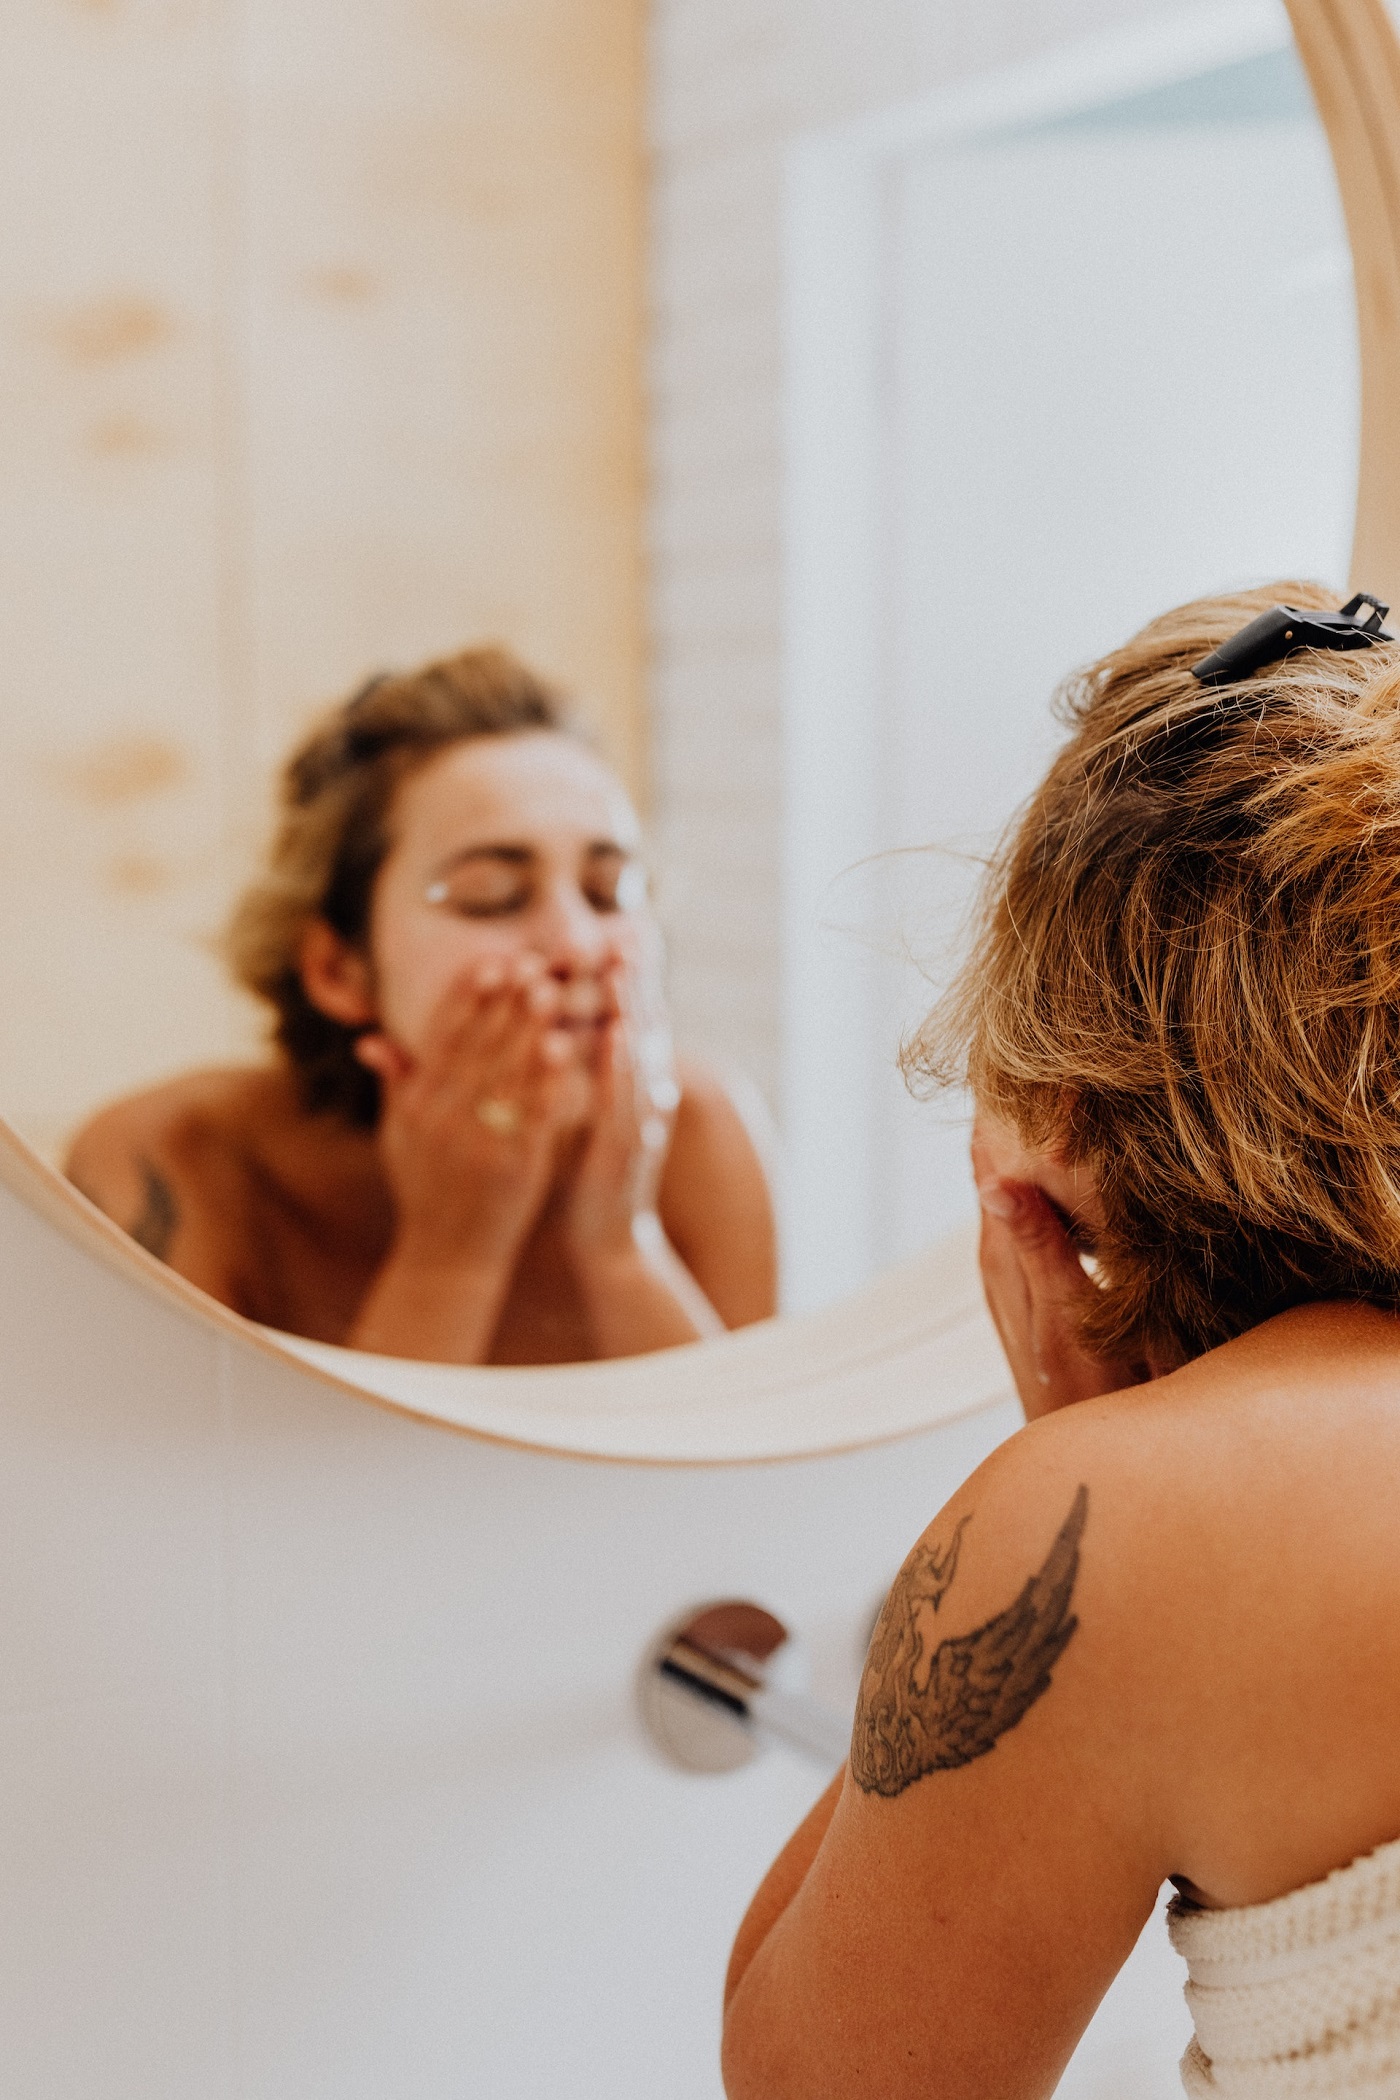 How to Select Facewash for Acne-prone Skin?